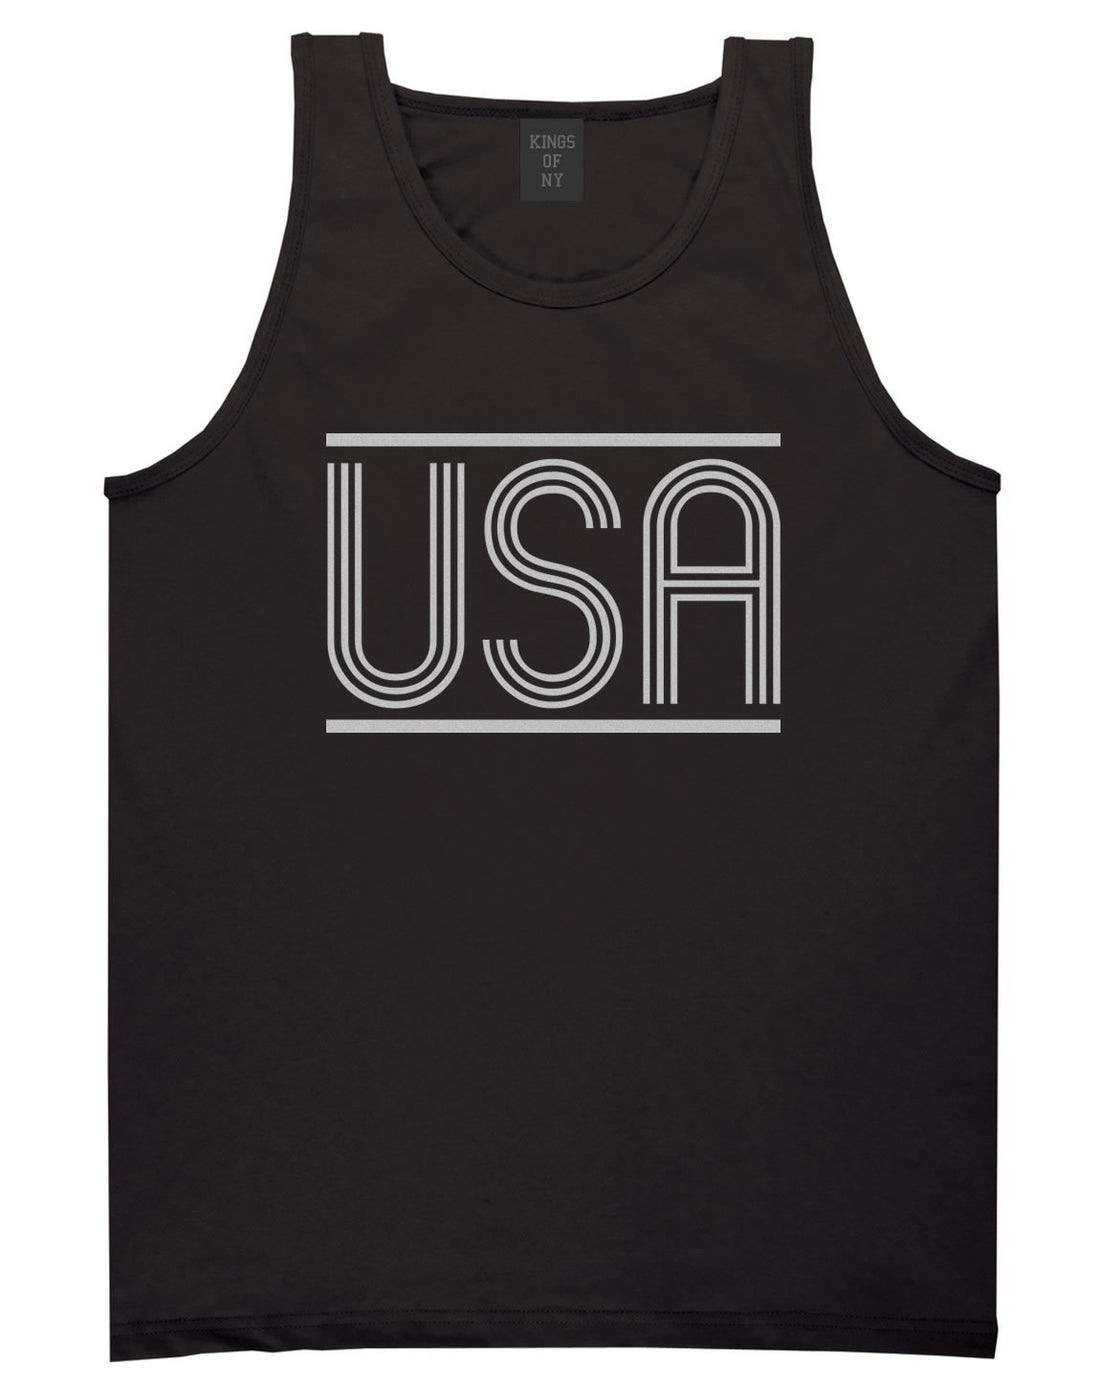 USA America Fall15 Tank Top in Black by Kings Of NY